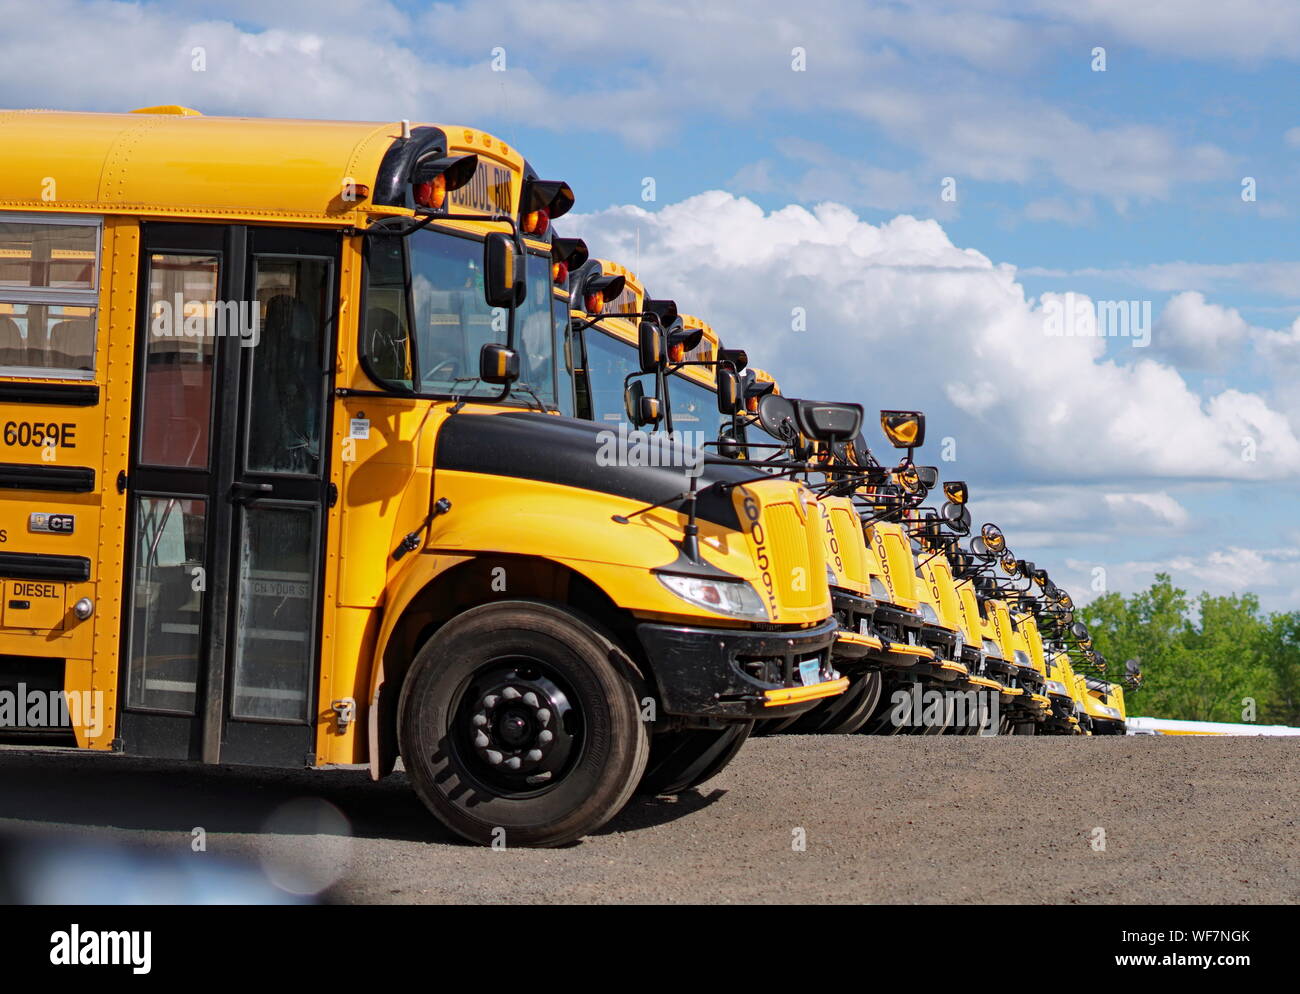 middletown-ct-usa-june-6-2019-row-of-yellow-school-buses-in-a-parking-lot-stock-photo-alamy